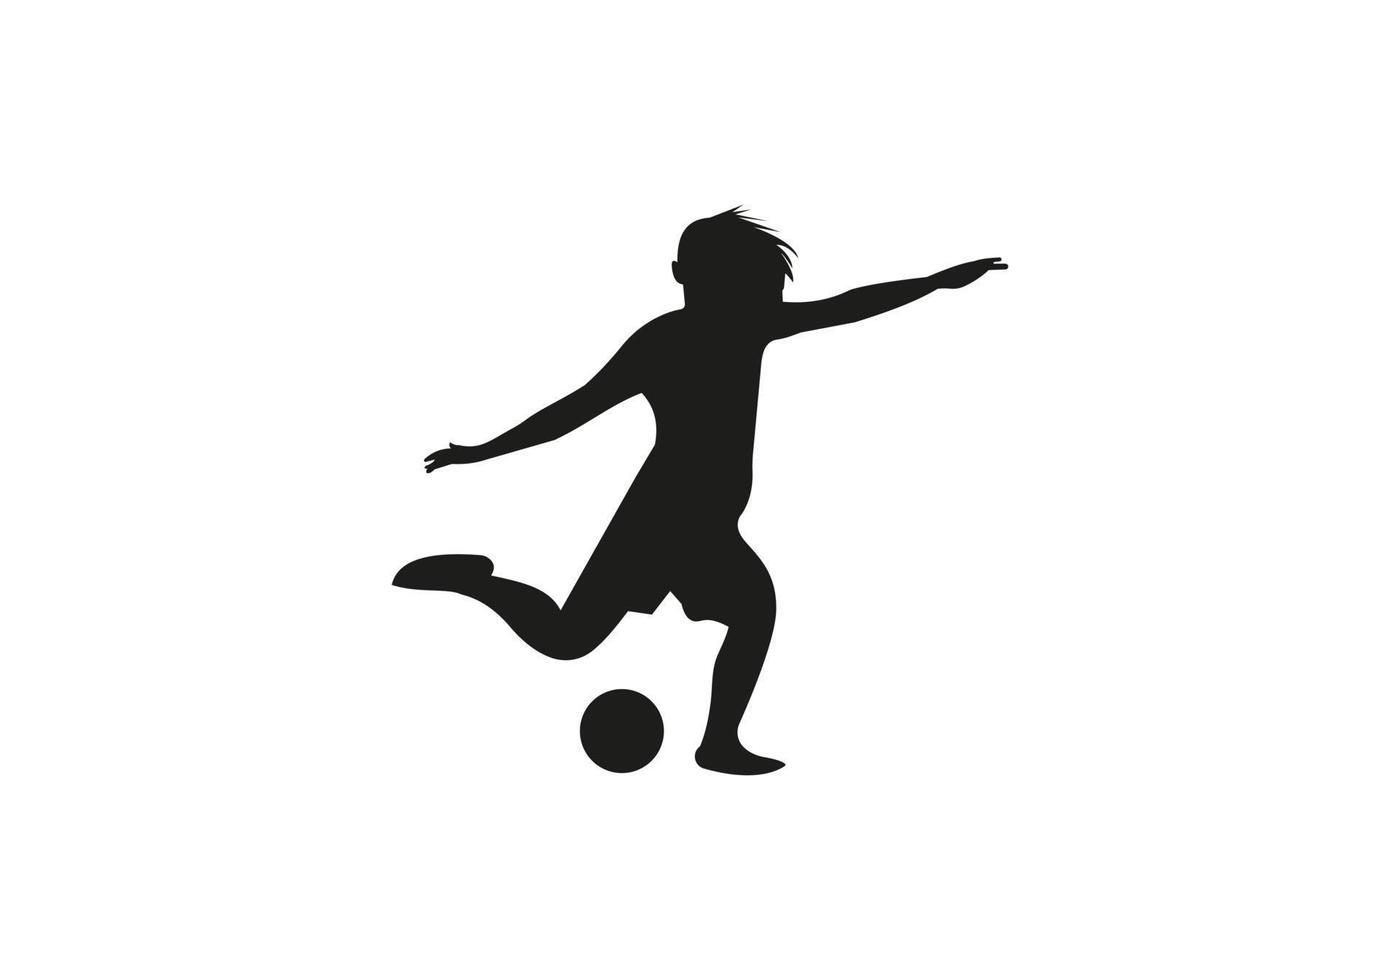 Football player running and kicking a ball action designed using colorful vector